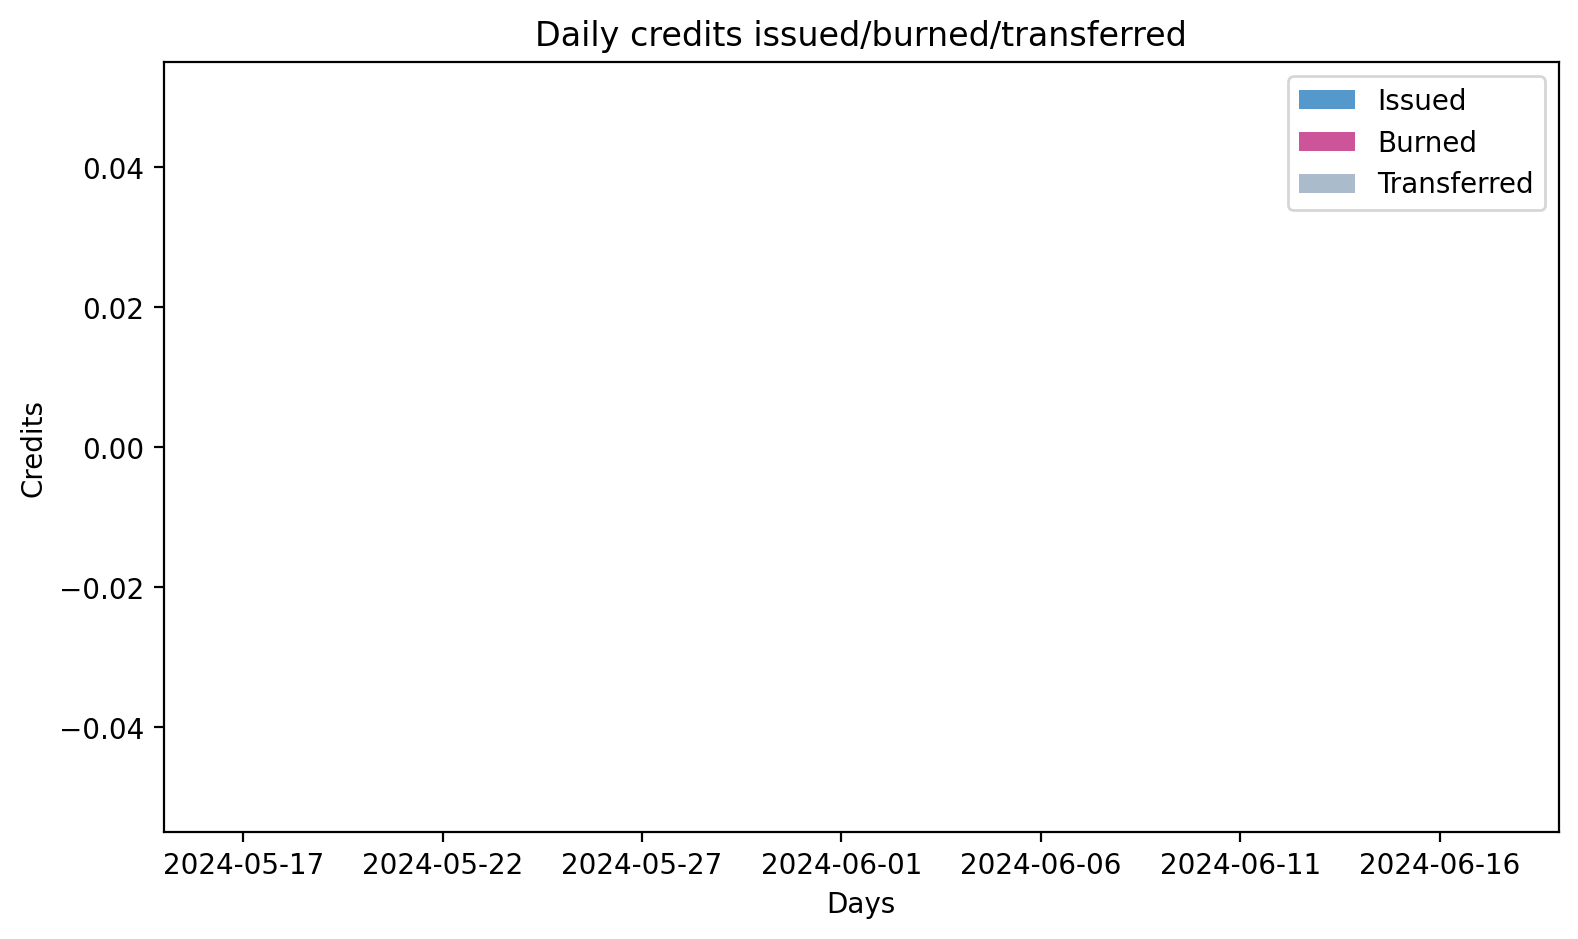 Daily credits issued/burned/transferred